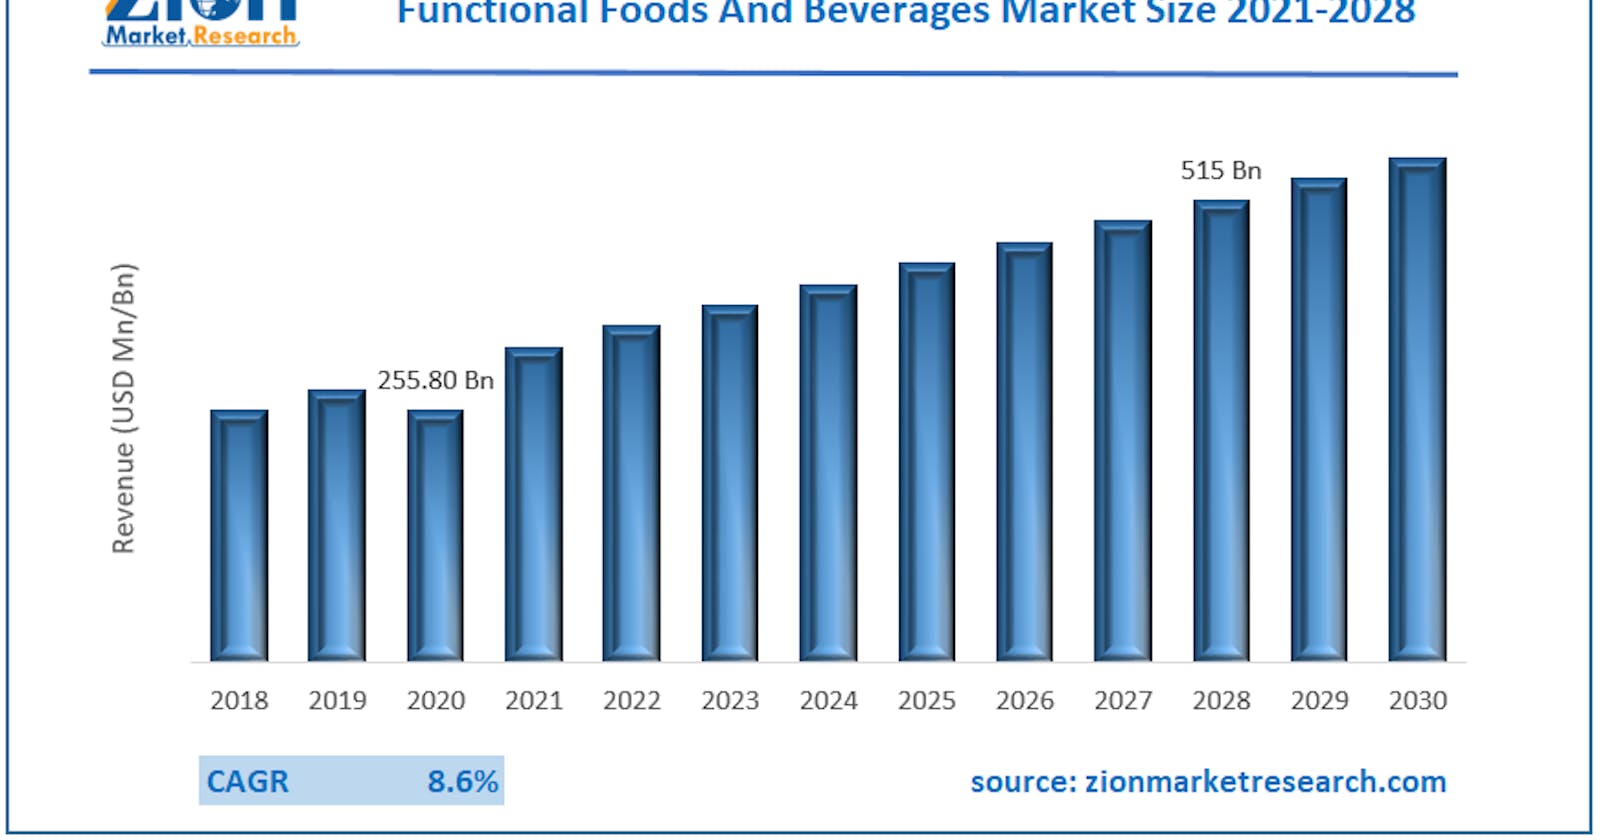 Global Functional Foods And Beverages Market Size Indicating Enormous Demand in Future 2023-2030